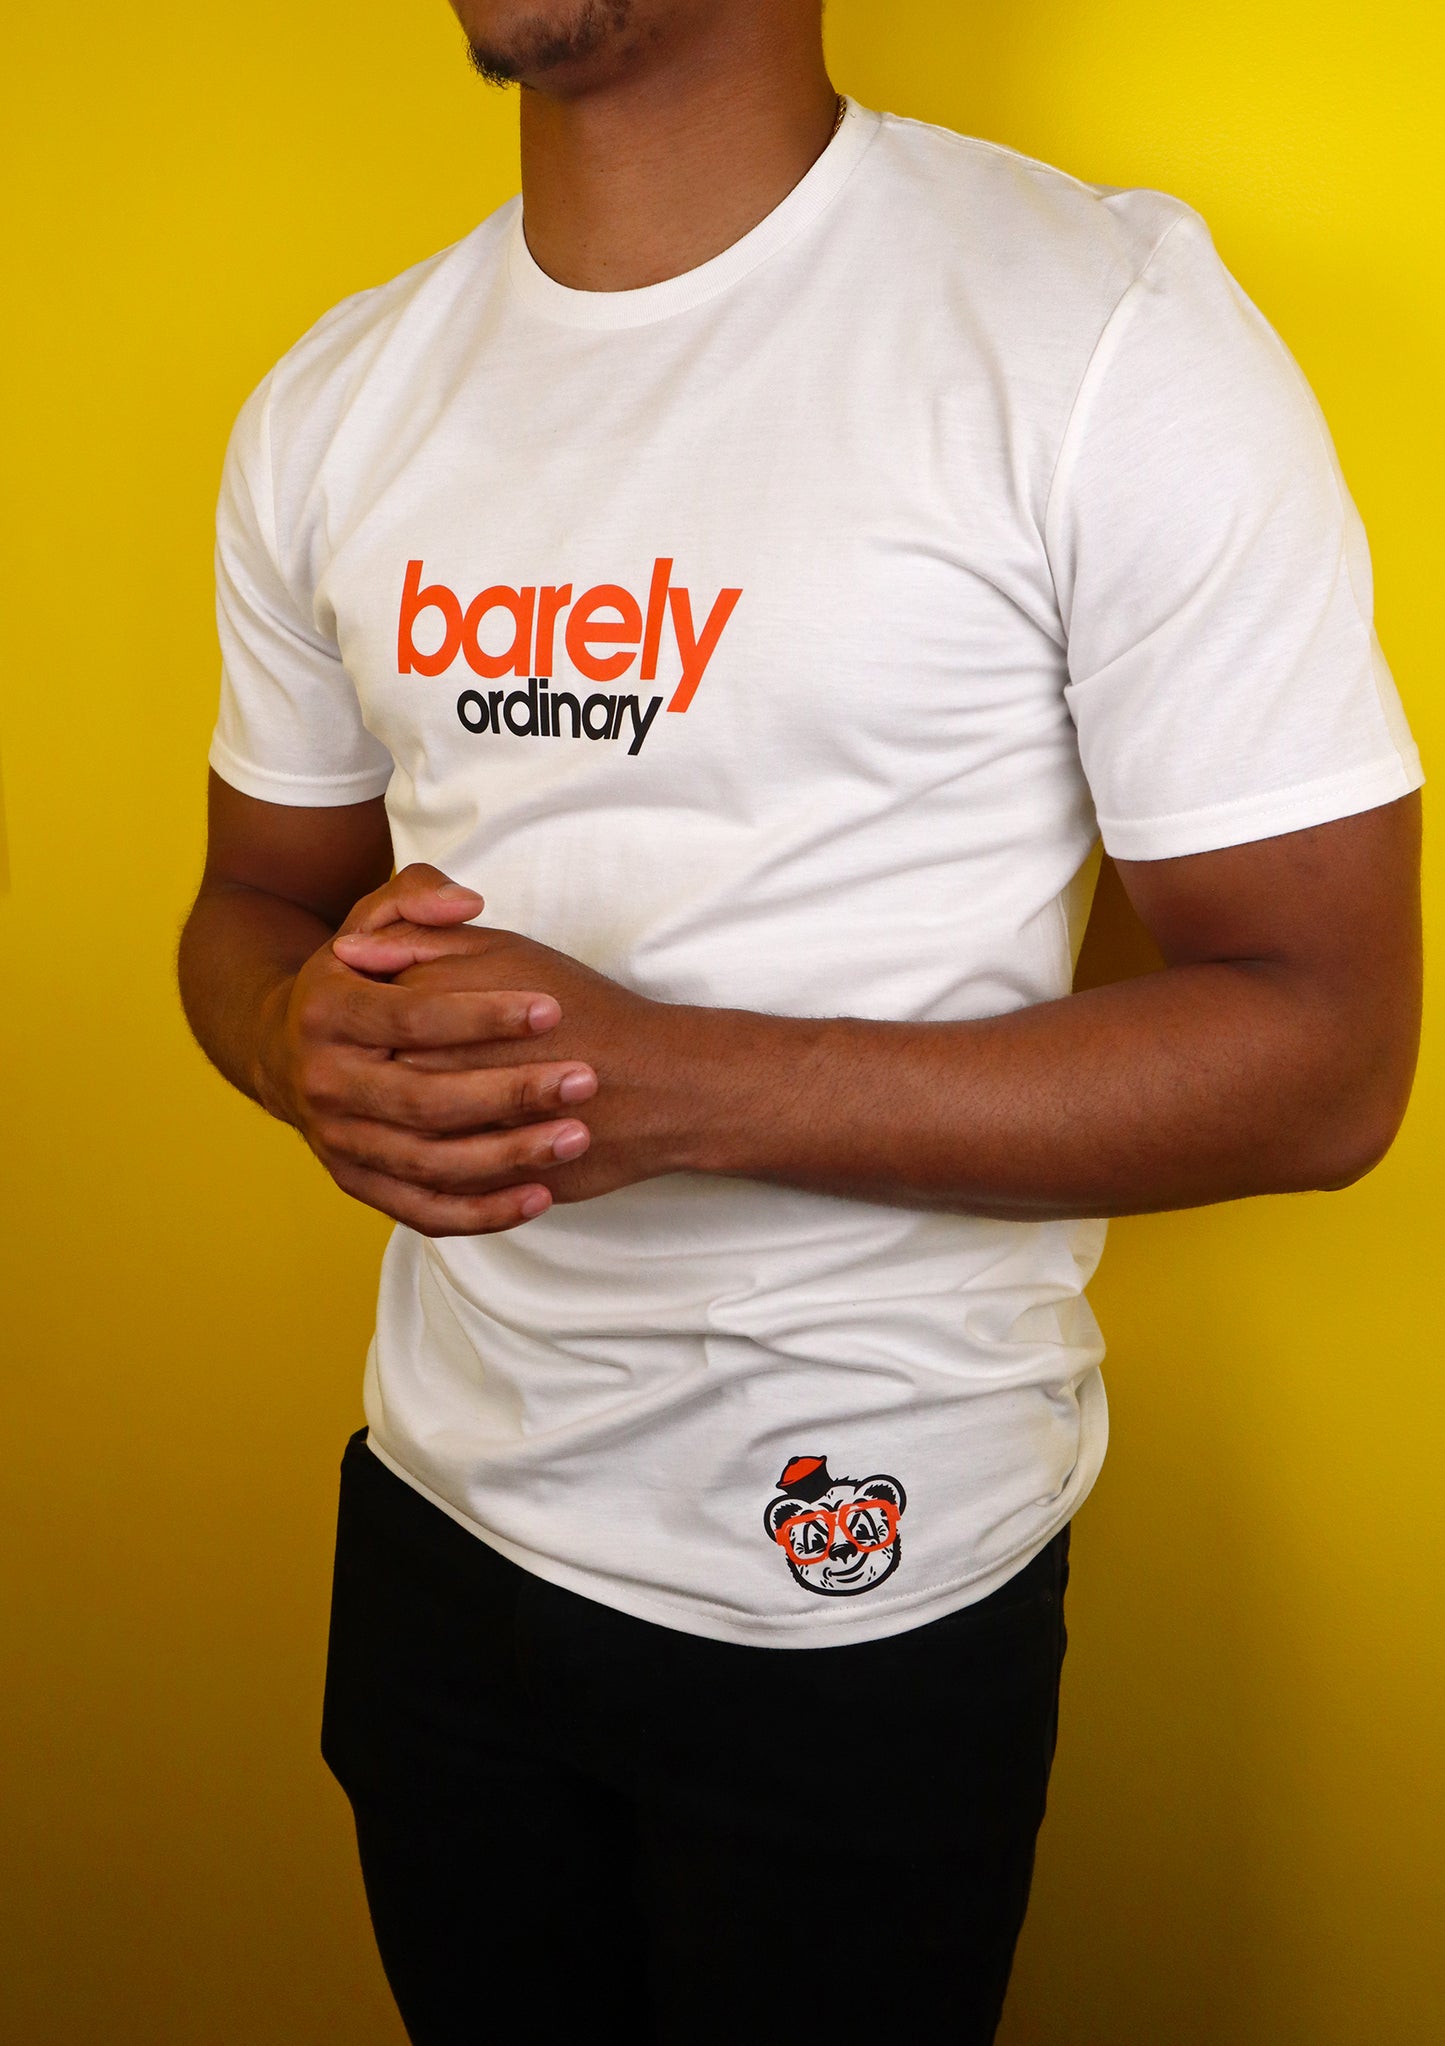 Barely "Stamped" Logo Tee (Org/Blk)